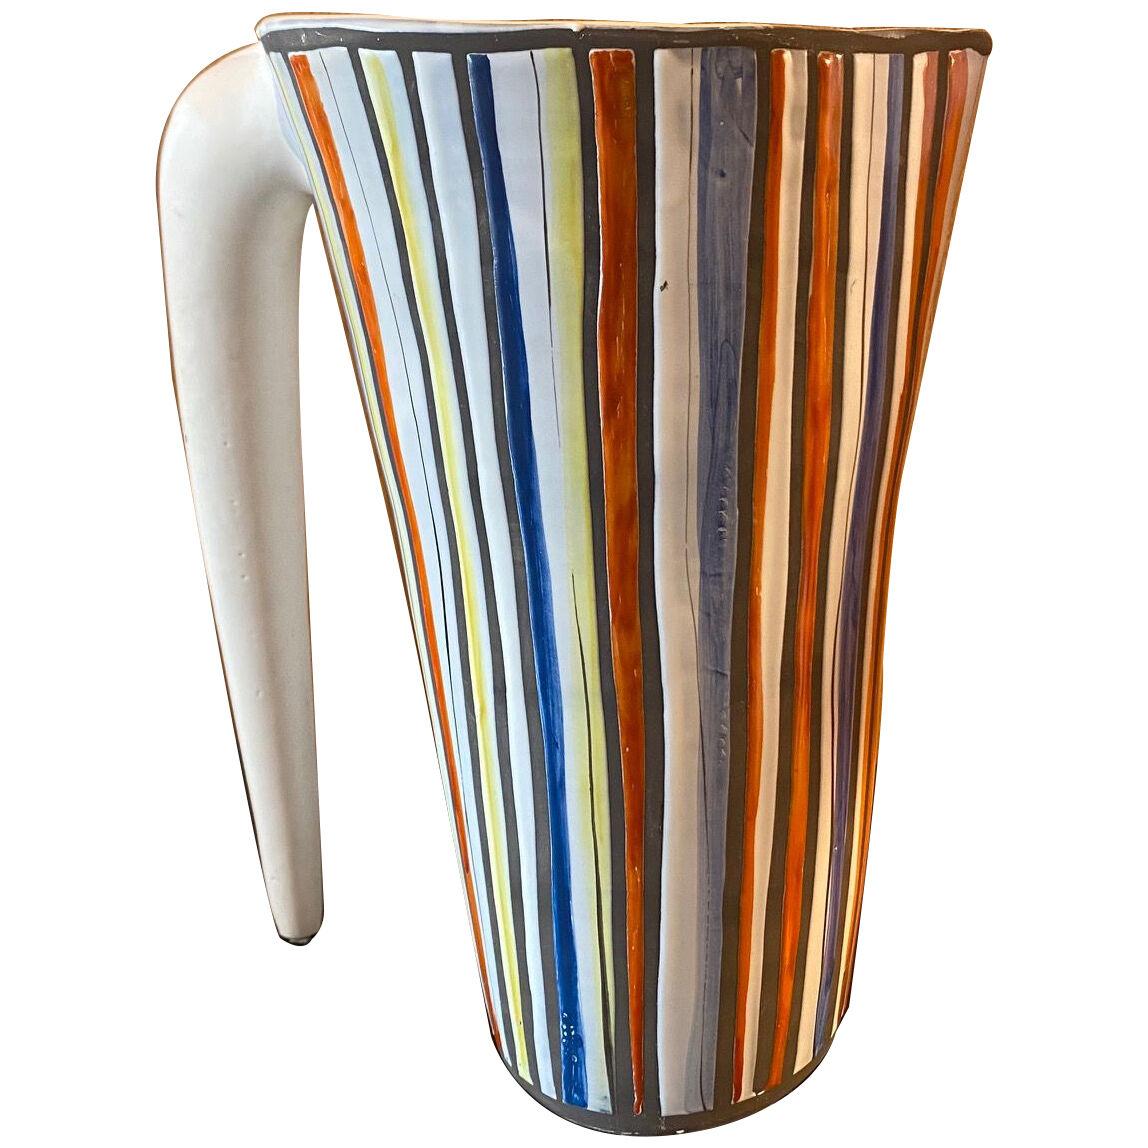 Ceramic Pitcher by Roger Capron, Vallauris, south of France, 1960s